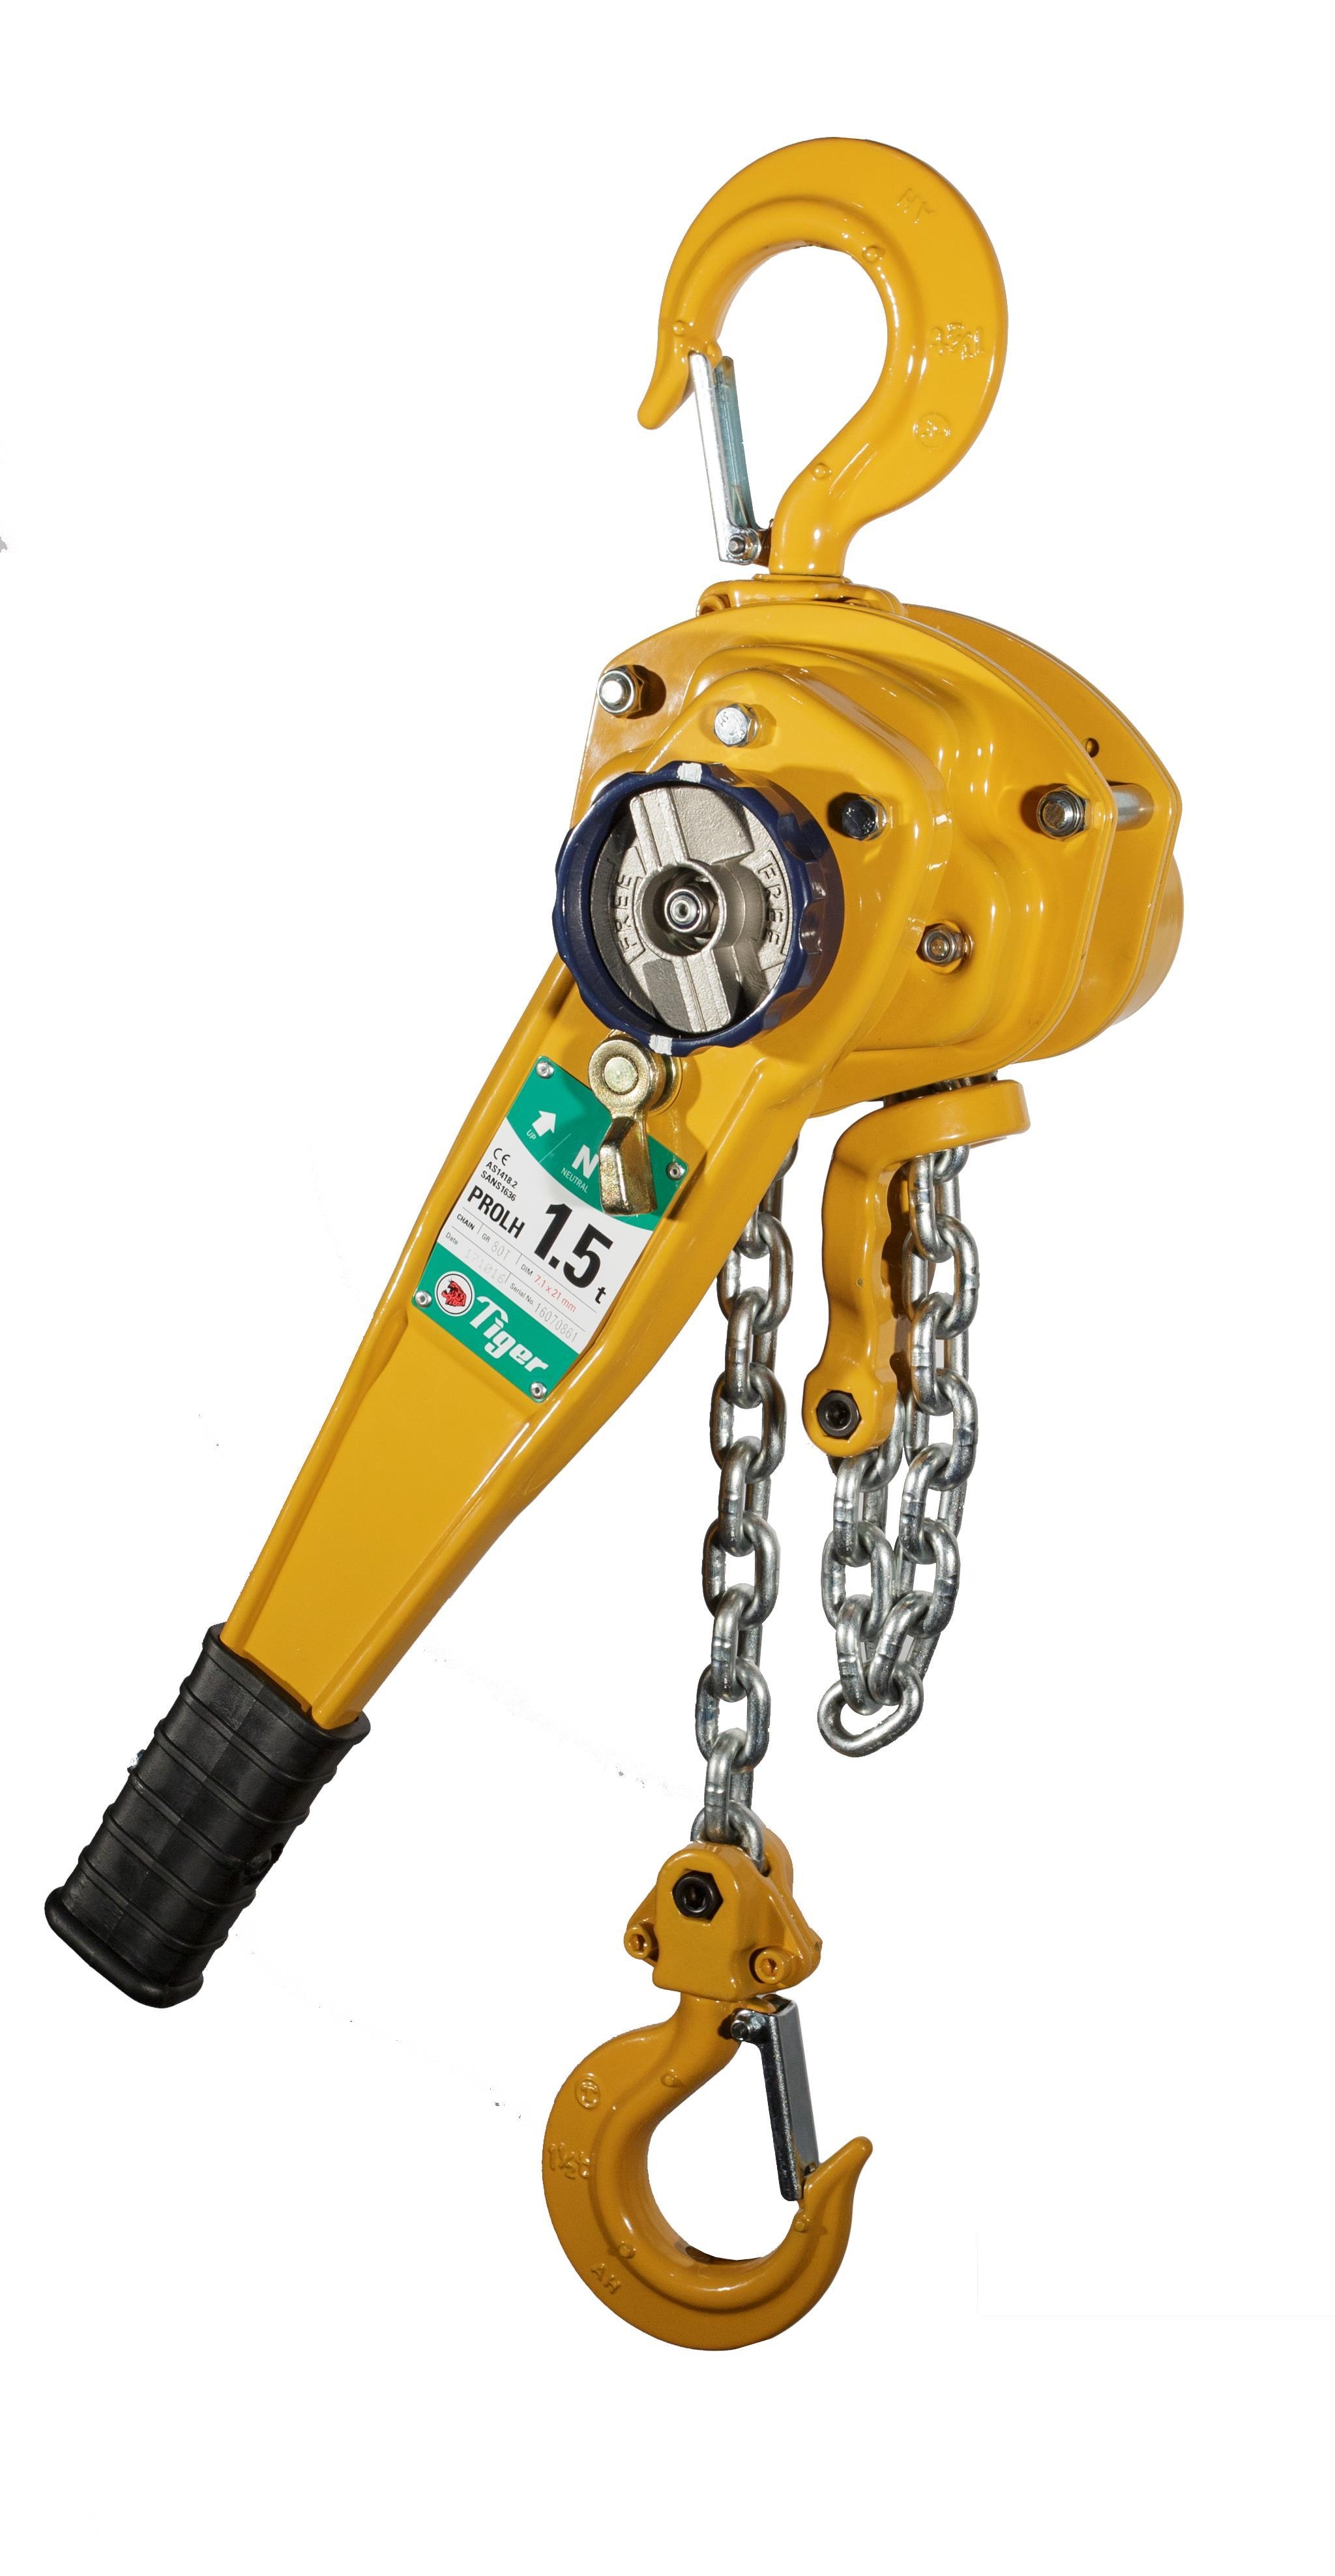 Hoistshop – Tiger Professional Lever Hoist Type PROLH – 20.0T Capacity With Travelling End-Stop – 3.5m – Stainless Steel – Yellow / Silver